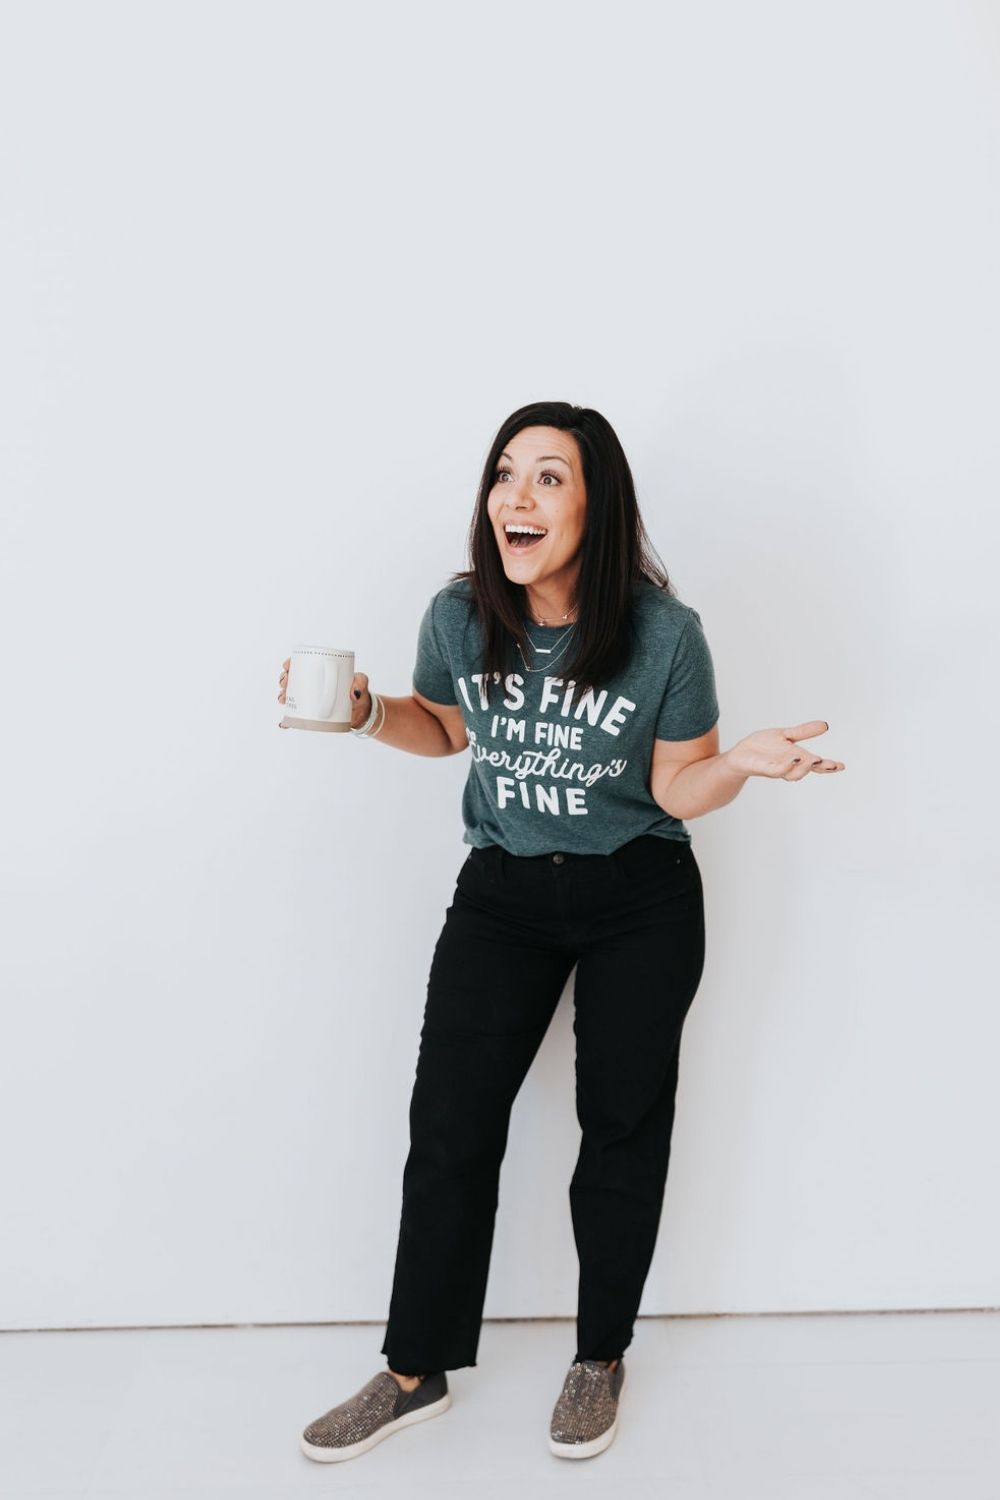 dark haired lady wearing black pants and a green t-shirt holding a mug in her right hand with her left hand up to her side, palm up smiling at someone off the right of the camera